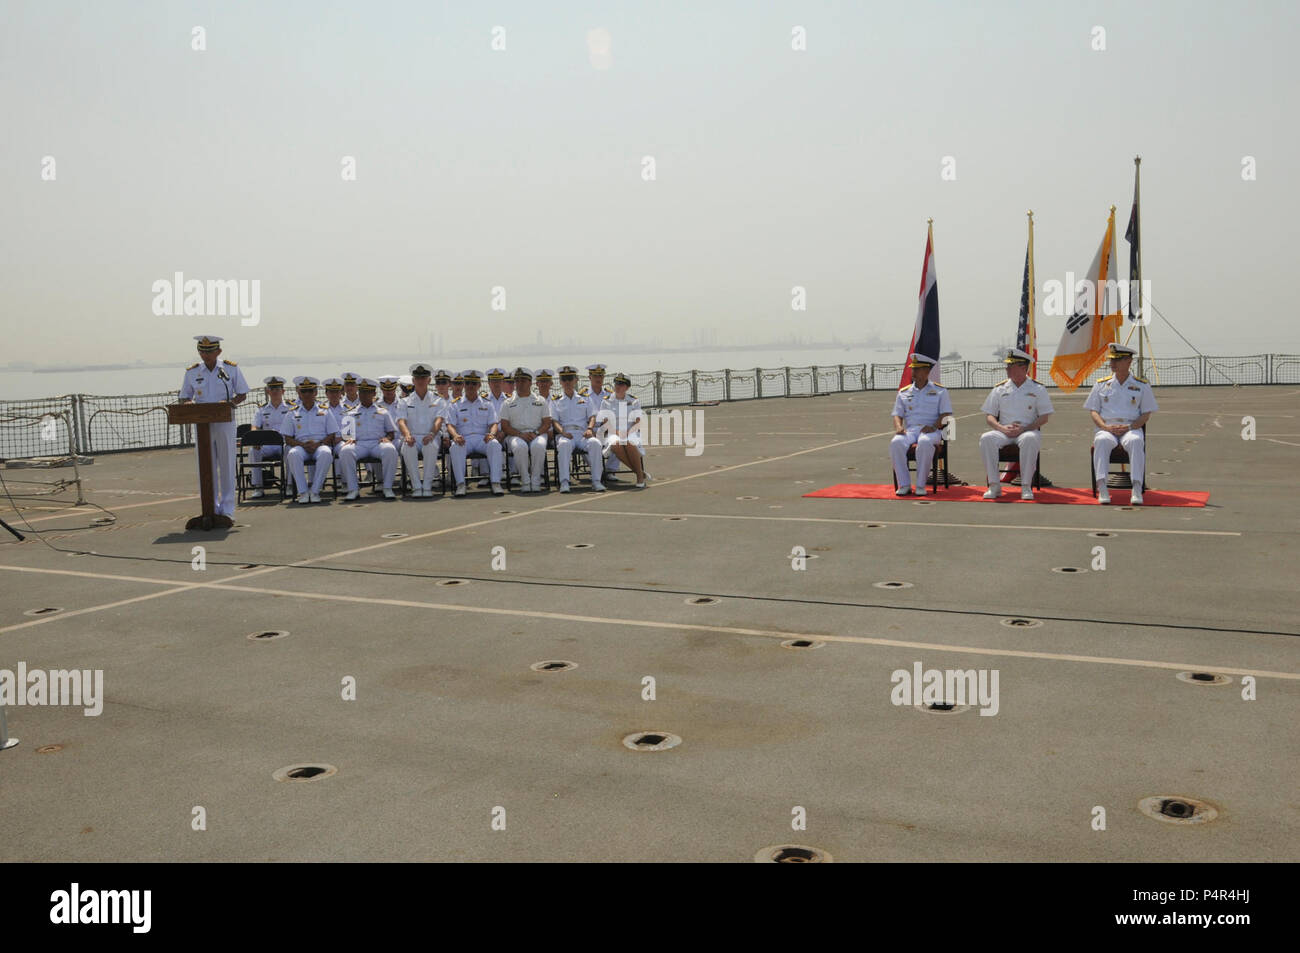 MINA SALMAN PIER, Bahrain (June 18, 2012) Members from the Combined Task Force (CTF) 151 staff  listen to a speech during a change of command ceremony aboard Royal Fleet Auxiliary (RFA) Fort Victoria (A387). Republic of Korea Navy Rear Adm. Anho Chung assumed command of CTF 151 from Royal Thai Navy Rear Adm. Tanin Likitawong. CTF 151 is a multi-national, mission based task force working under CMF, to conduct counter-piracy operations in the Southern Red Sea, Gulf of Aden, Somali Basin, Arabian Sea and Indian Ocean. Stock Photo